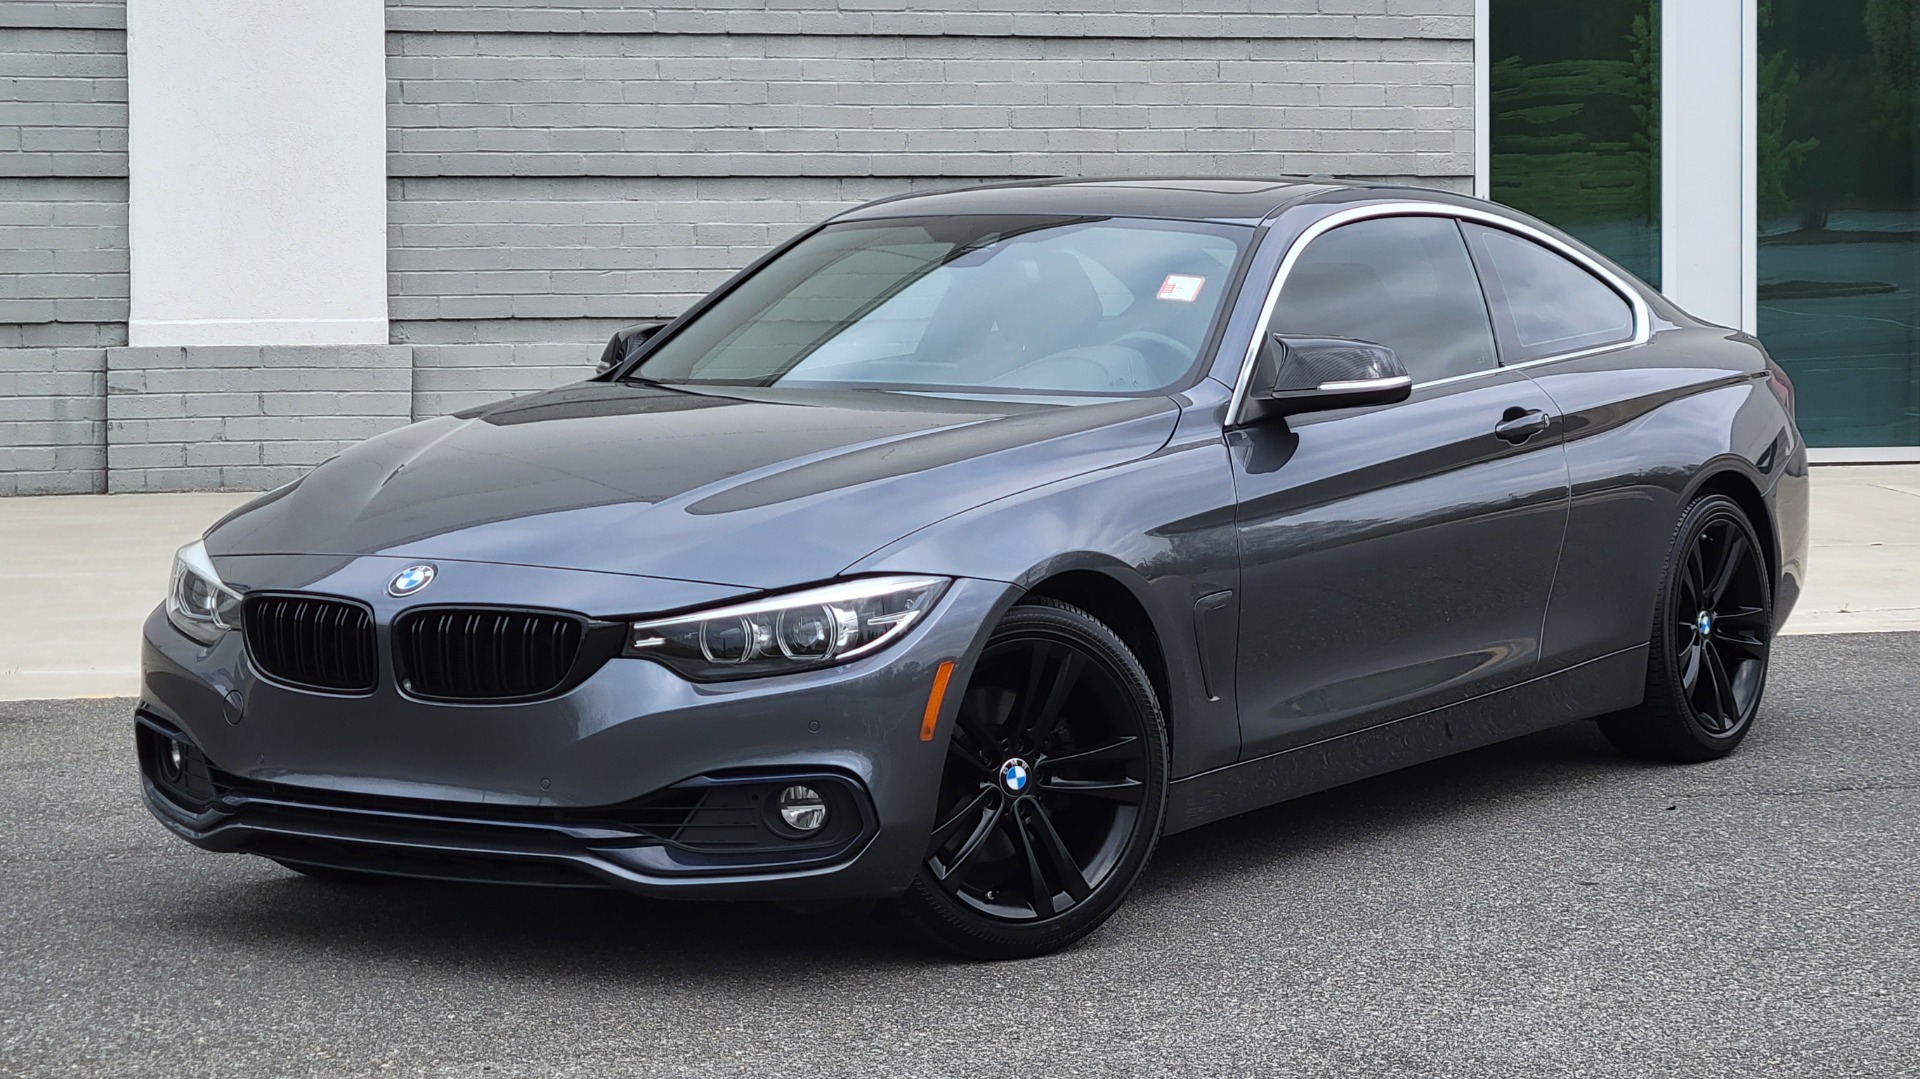 Used 2019 BMW 4 SERIES 430I COUPE 2.0L / RWD / DRVR ASST / CONV PKG / SUNROOF / REARVIEW for sale $31,295 at Formula Imports in Charlotte NC 28227 11